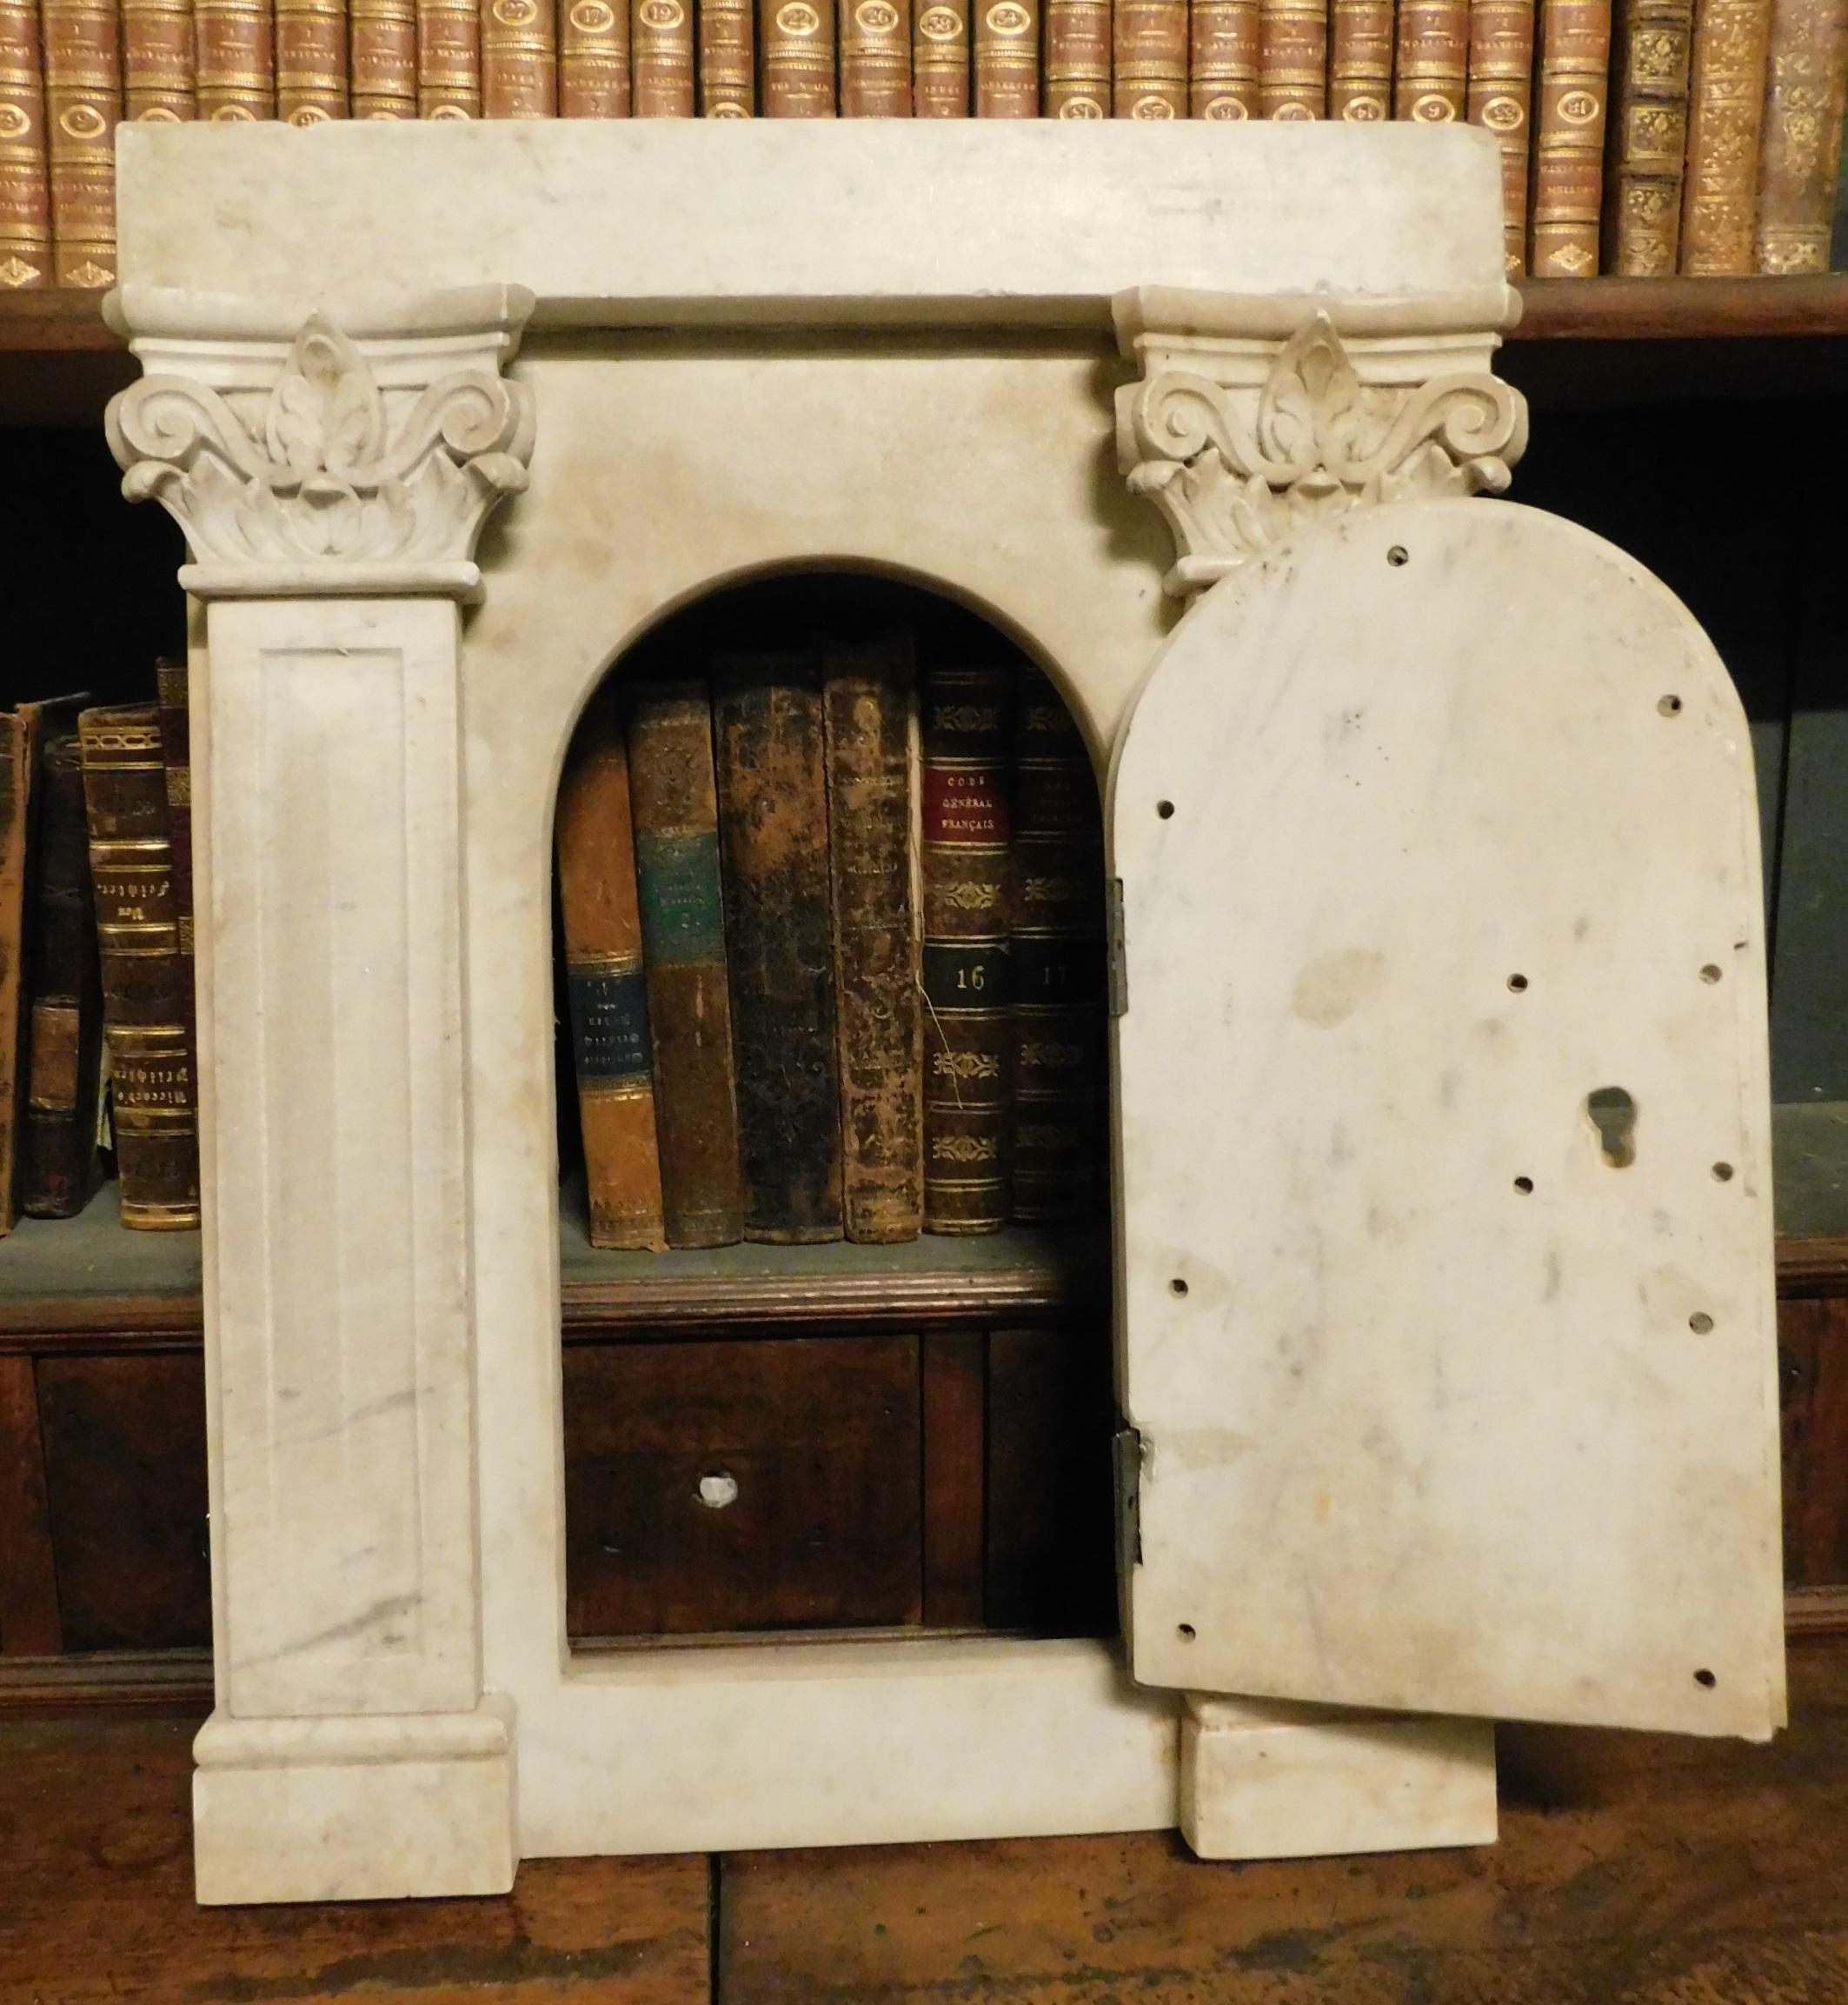 Hand-Carved Antique Placards, Tabernacle Door in White Carrara Marble, 19th Century, Italy